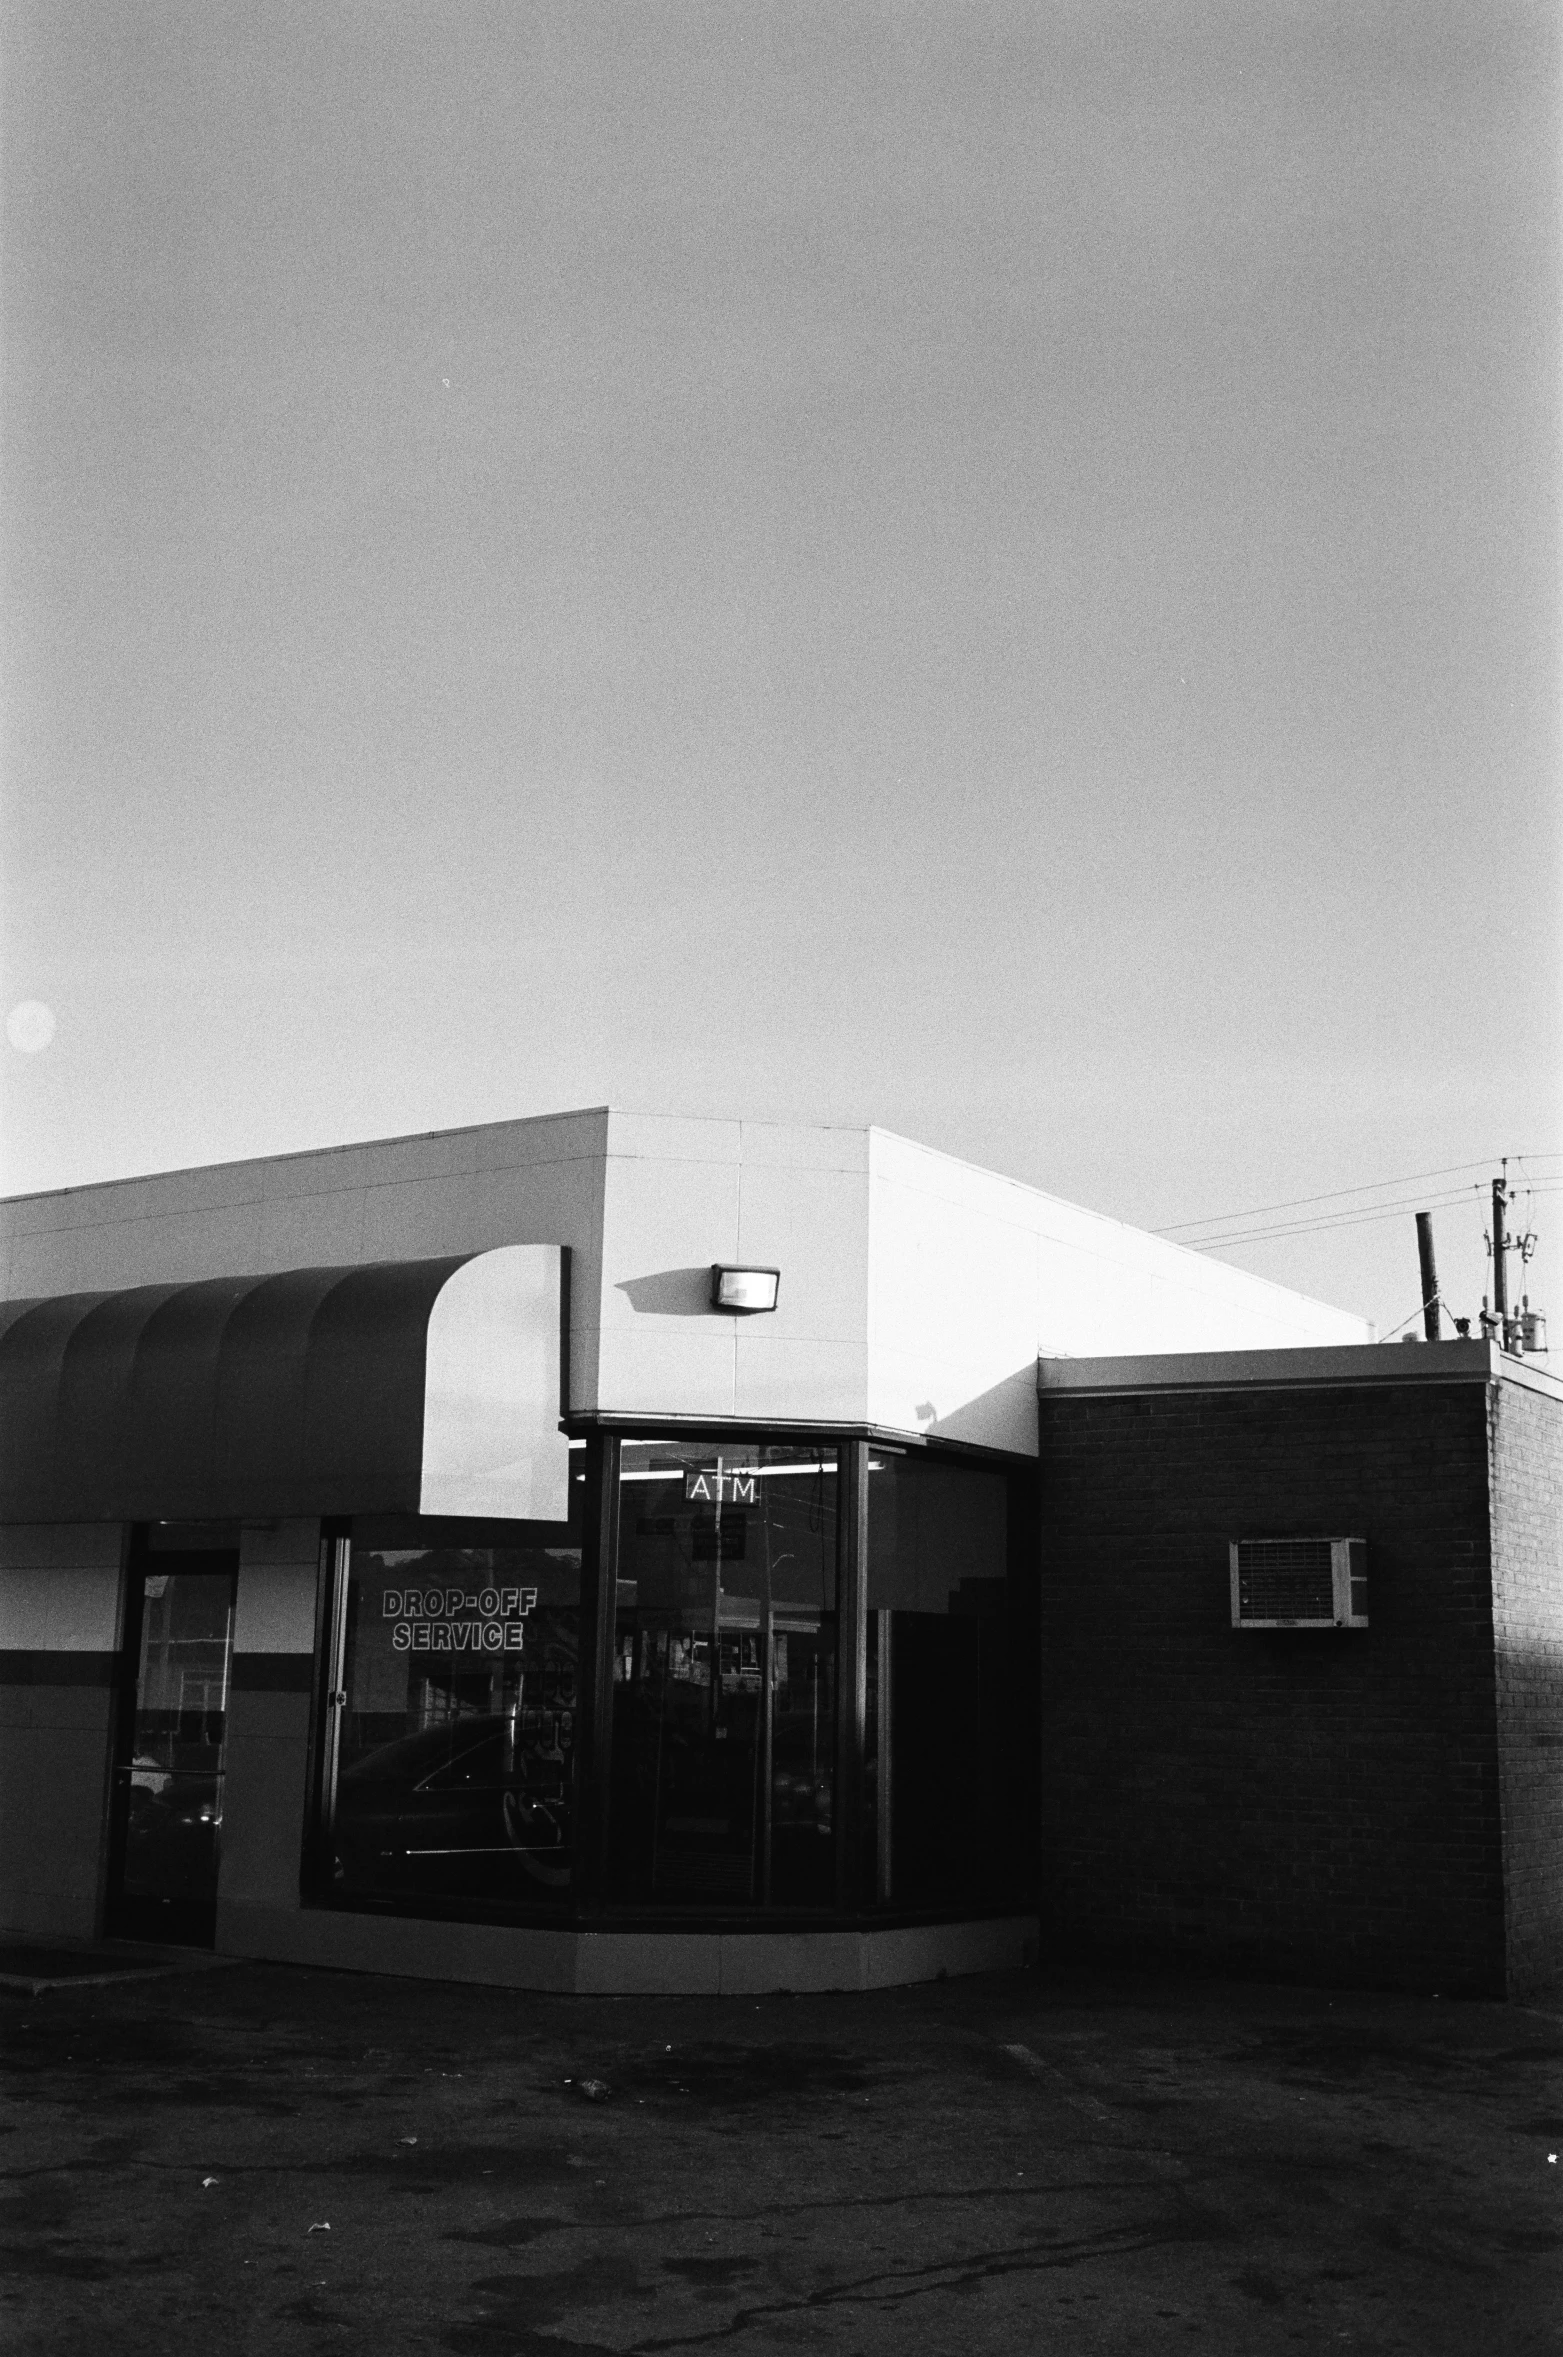 this is an image of a gas station in black and white